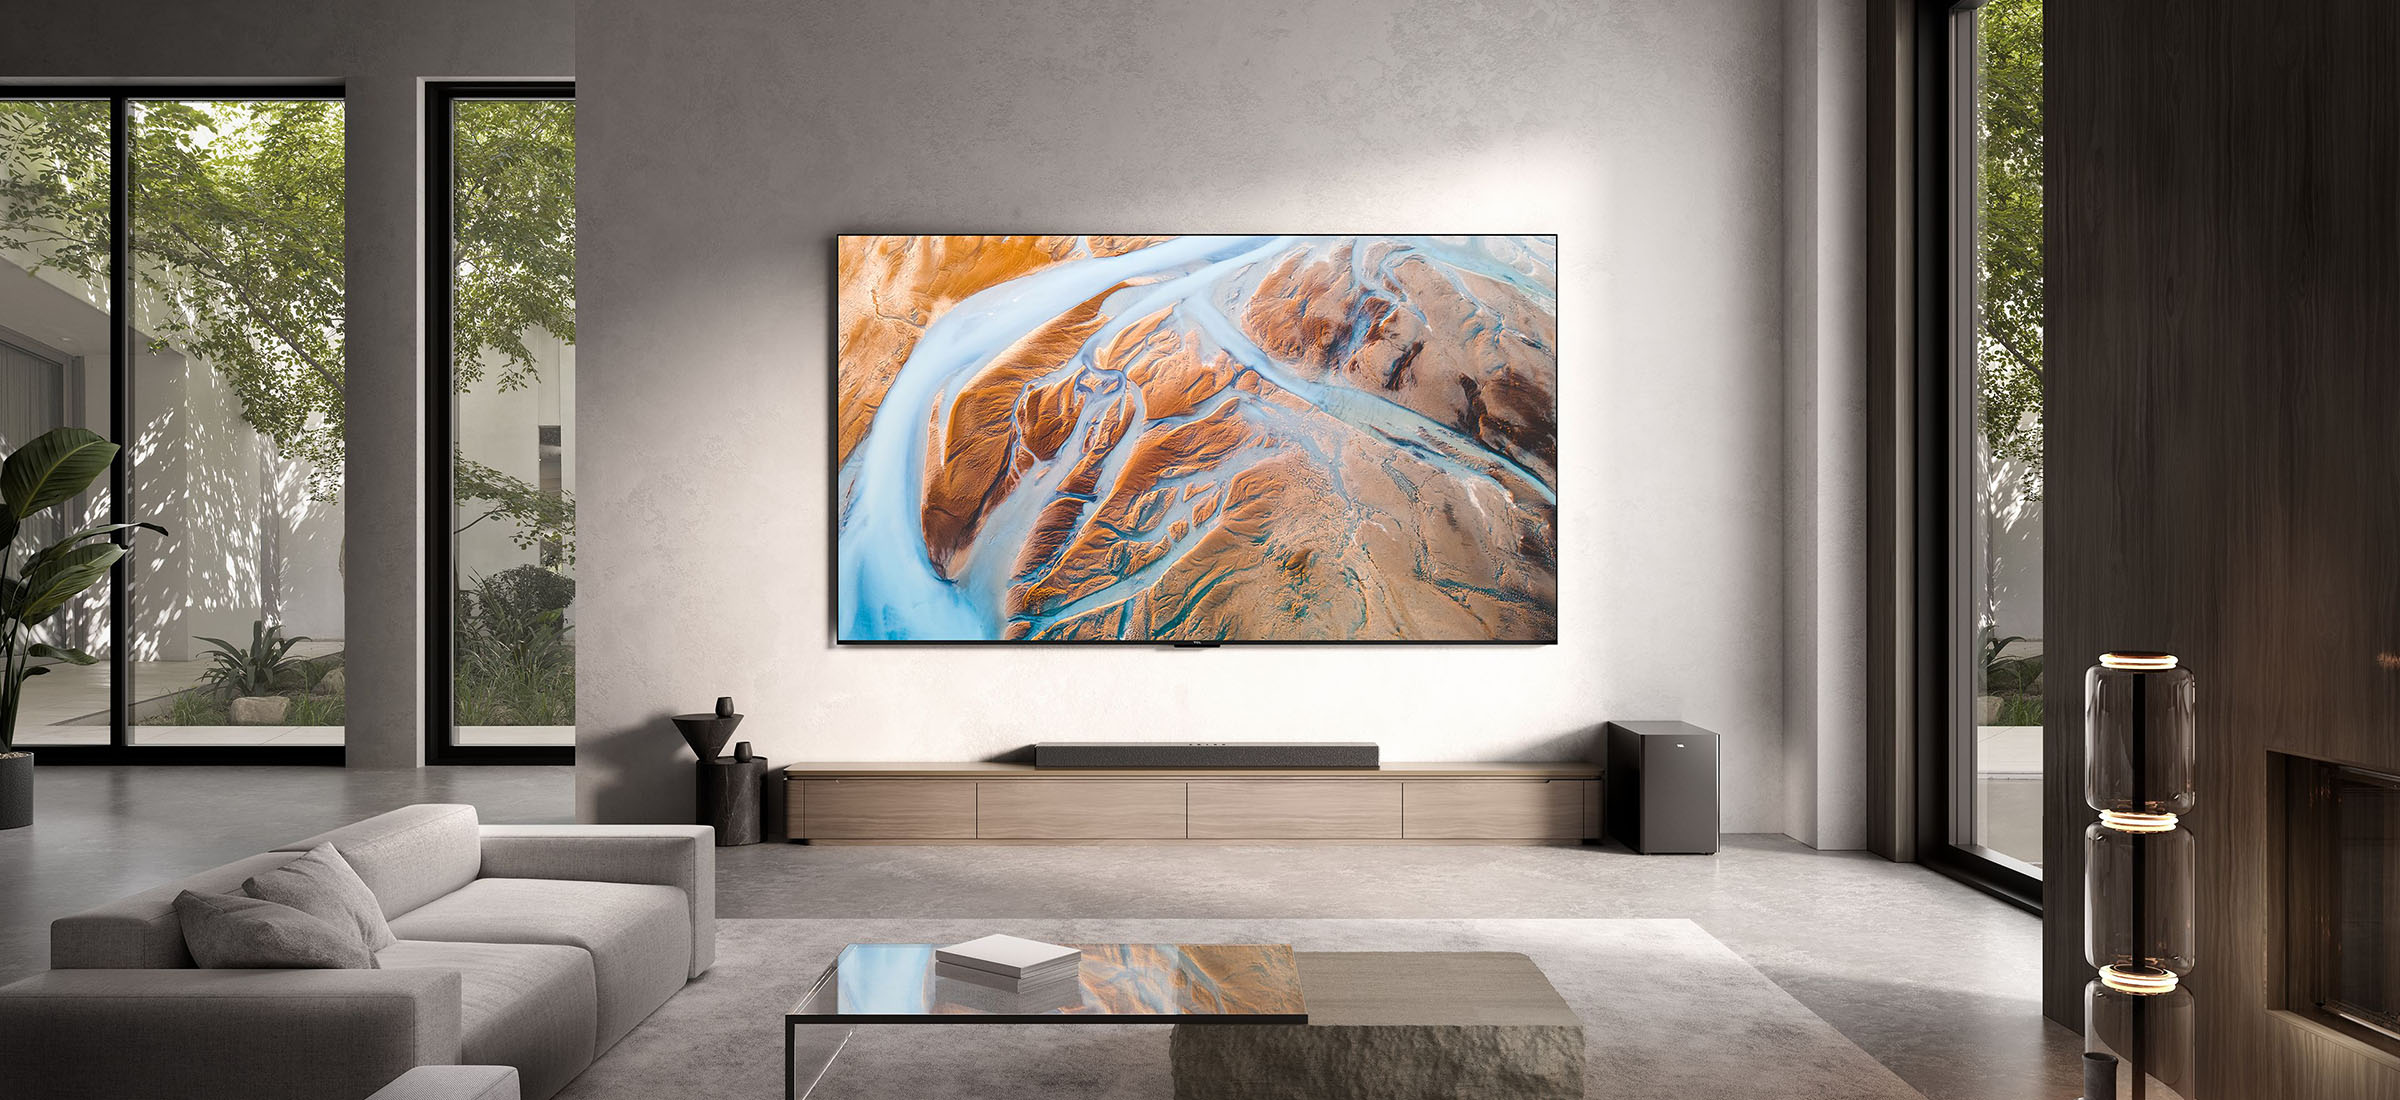 5000 area blur.  This TV promises to be a masterpiece of technology